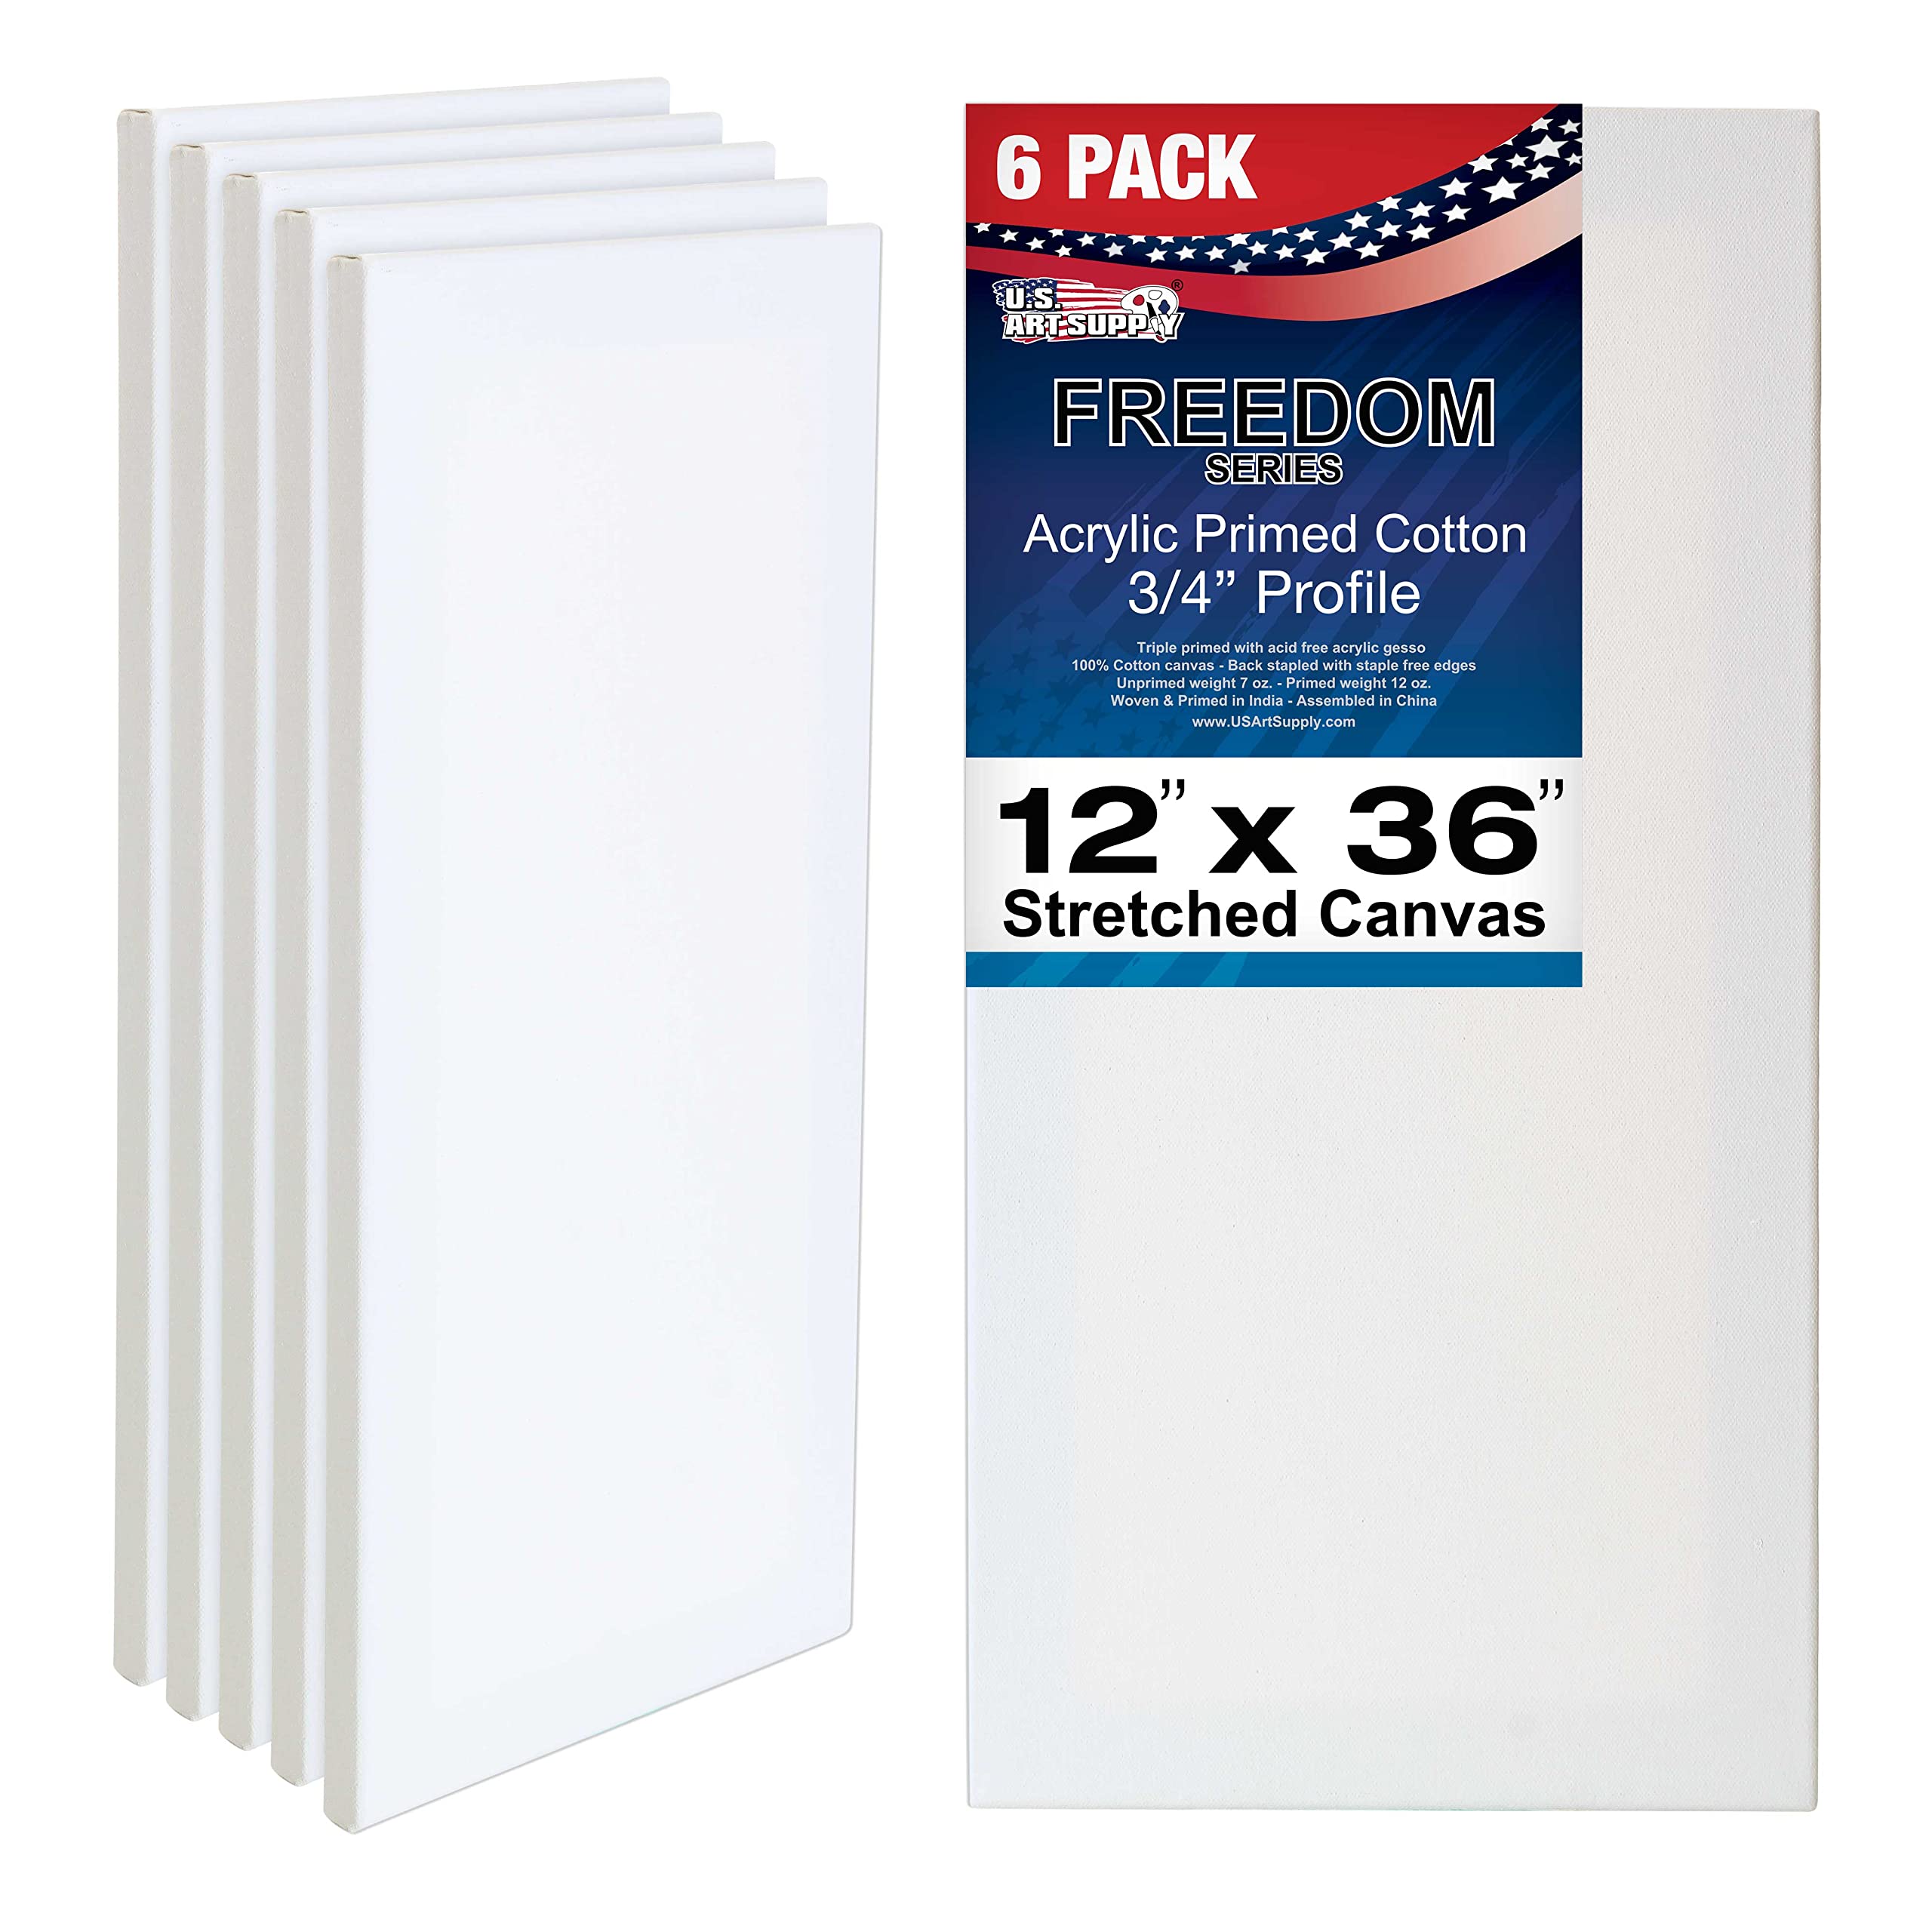 U.S. Art Supply 12 x 36 inch Stretched Canvas 12-Ounce Triple Primed, 6-Pack - Professional Artist Quality White Blank 3/4" Profile, 100% Cotton, Heavy-Weight Gesso - Acrylic Pouring, Oil Painting